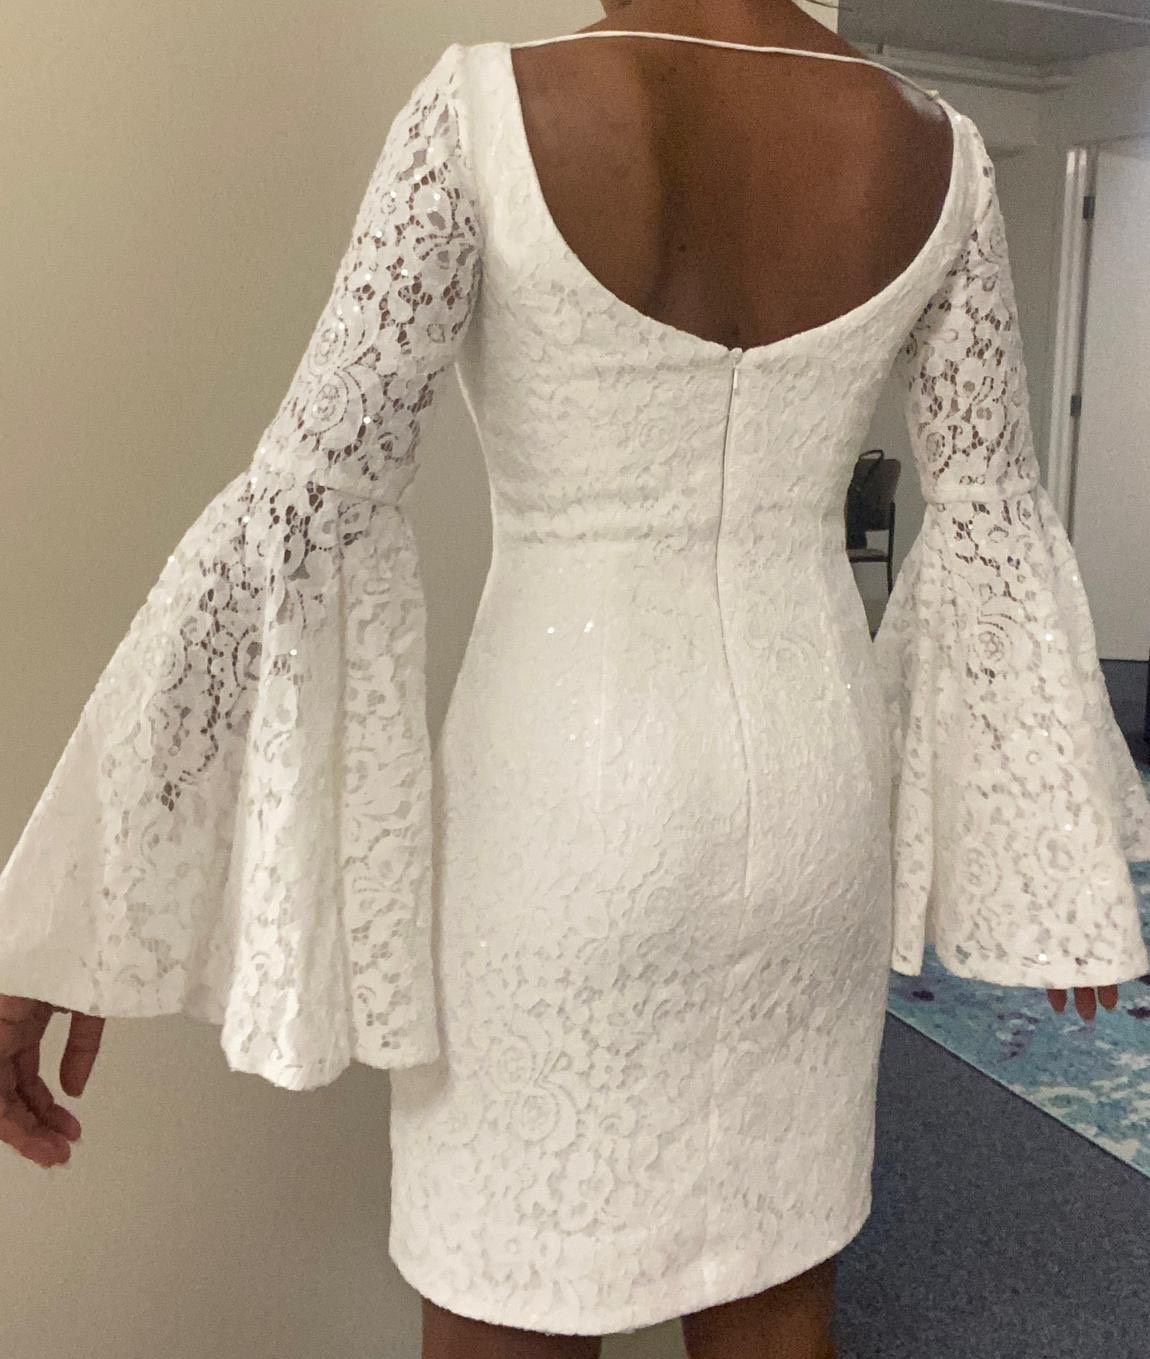 Hannah S Size 6 Wedding Long Sleeve Lace White Cocktail Dress on Queenly